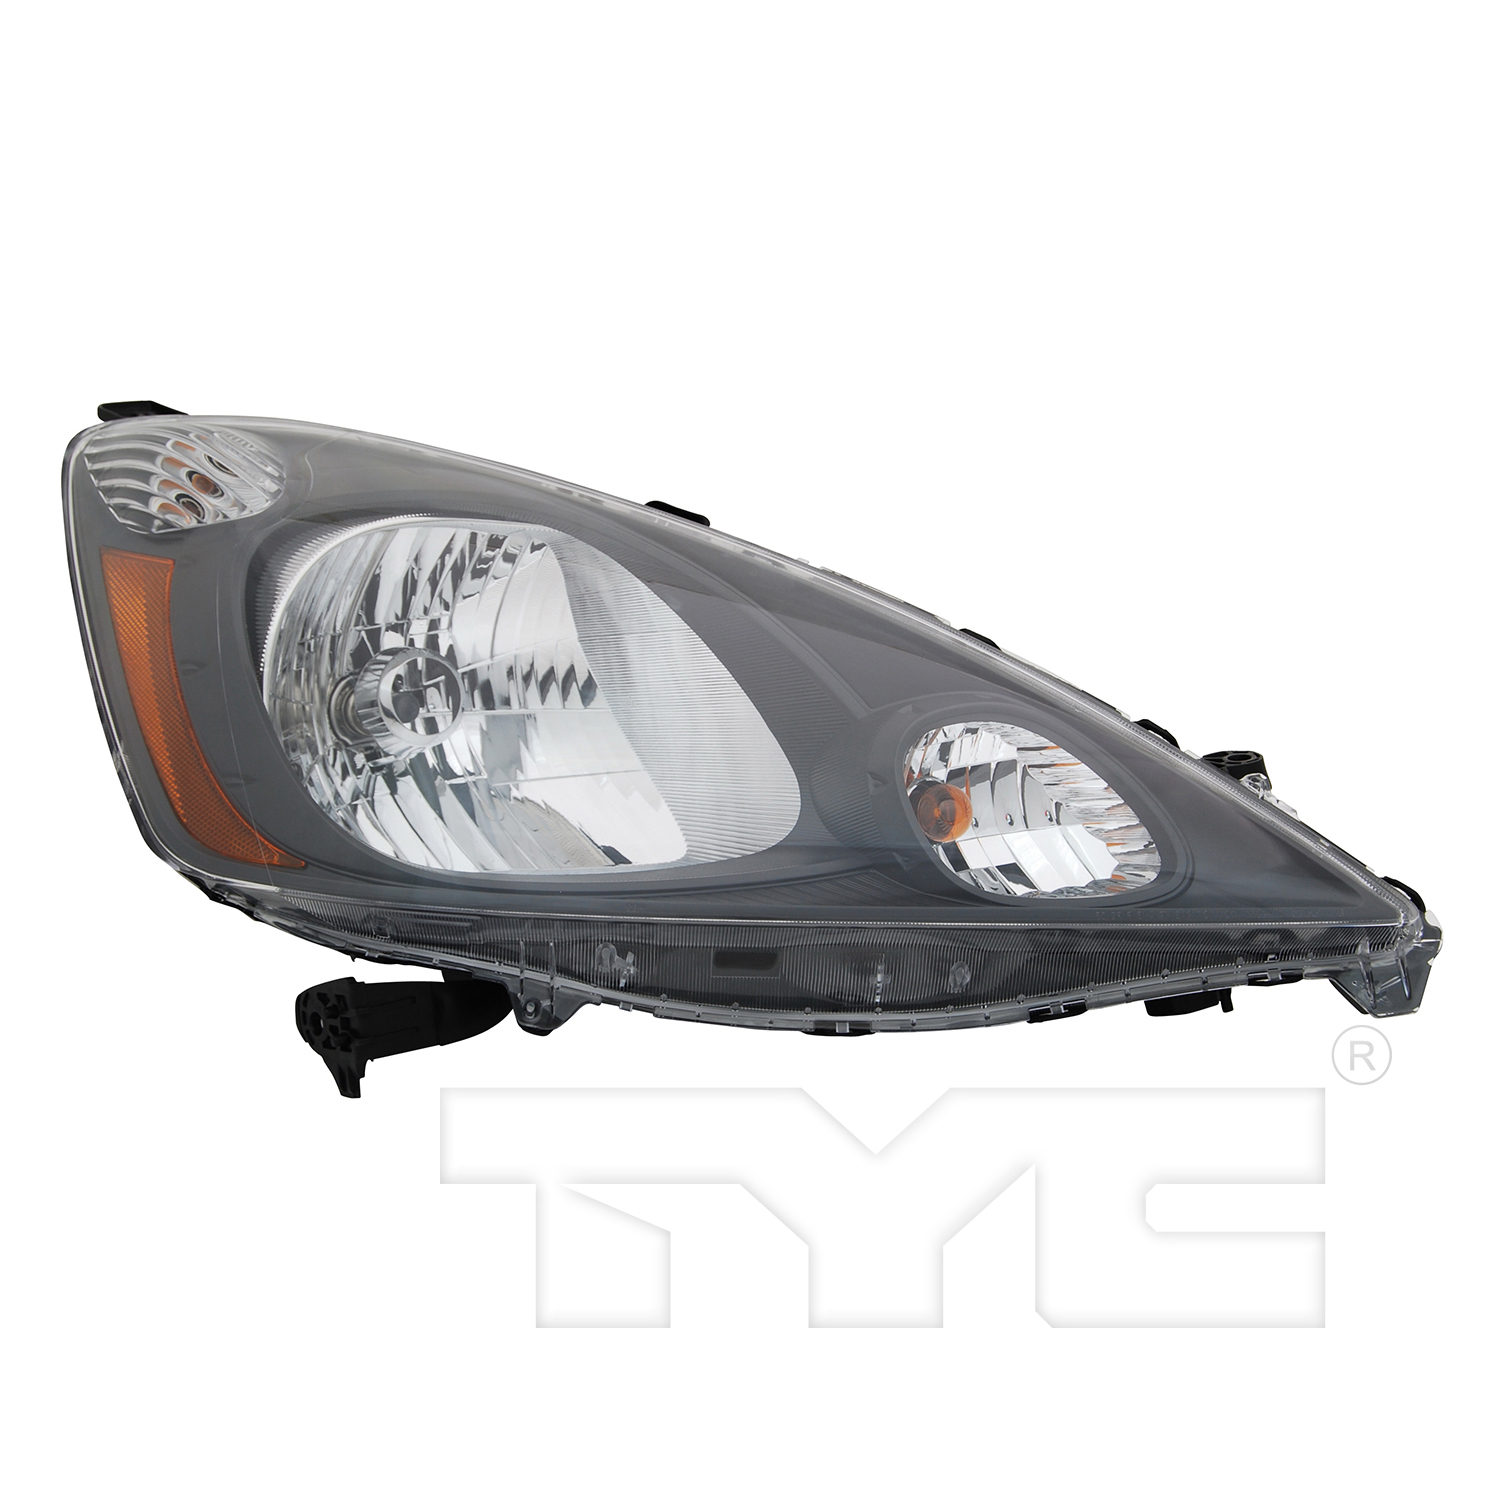 Aftermarket HEADLIGHTS for HONDA - FIT, FIT,09-14,RT Headlamp assy composite